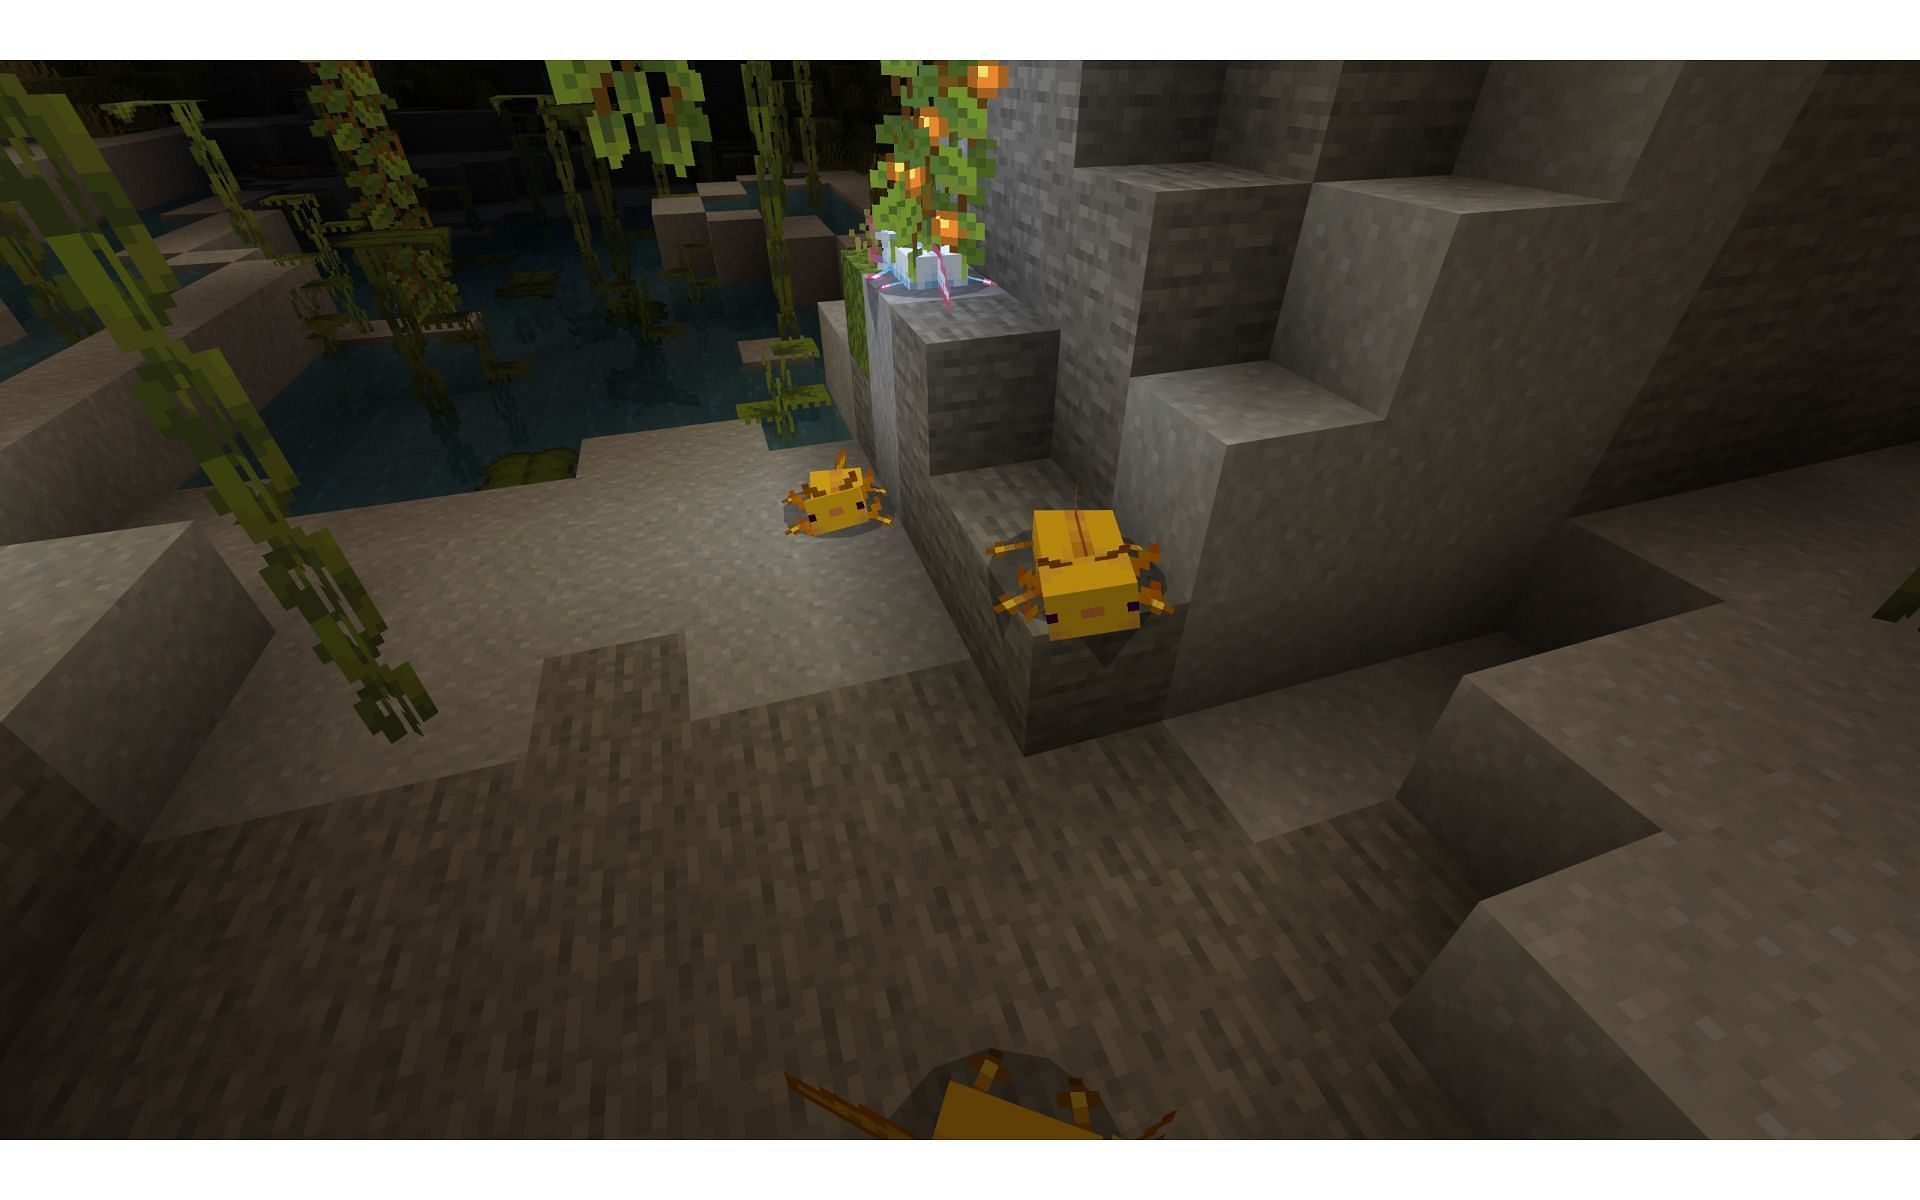 Playful axolotls will keep the player company in these caves (Image via Mojang)